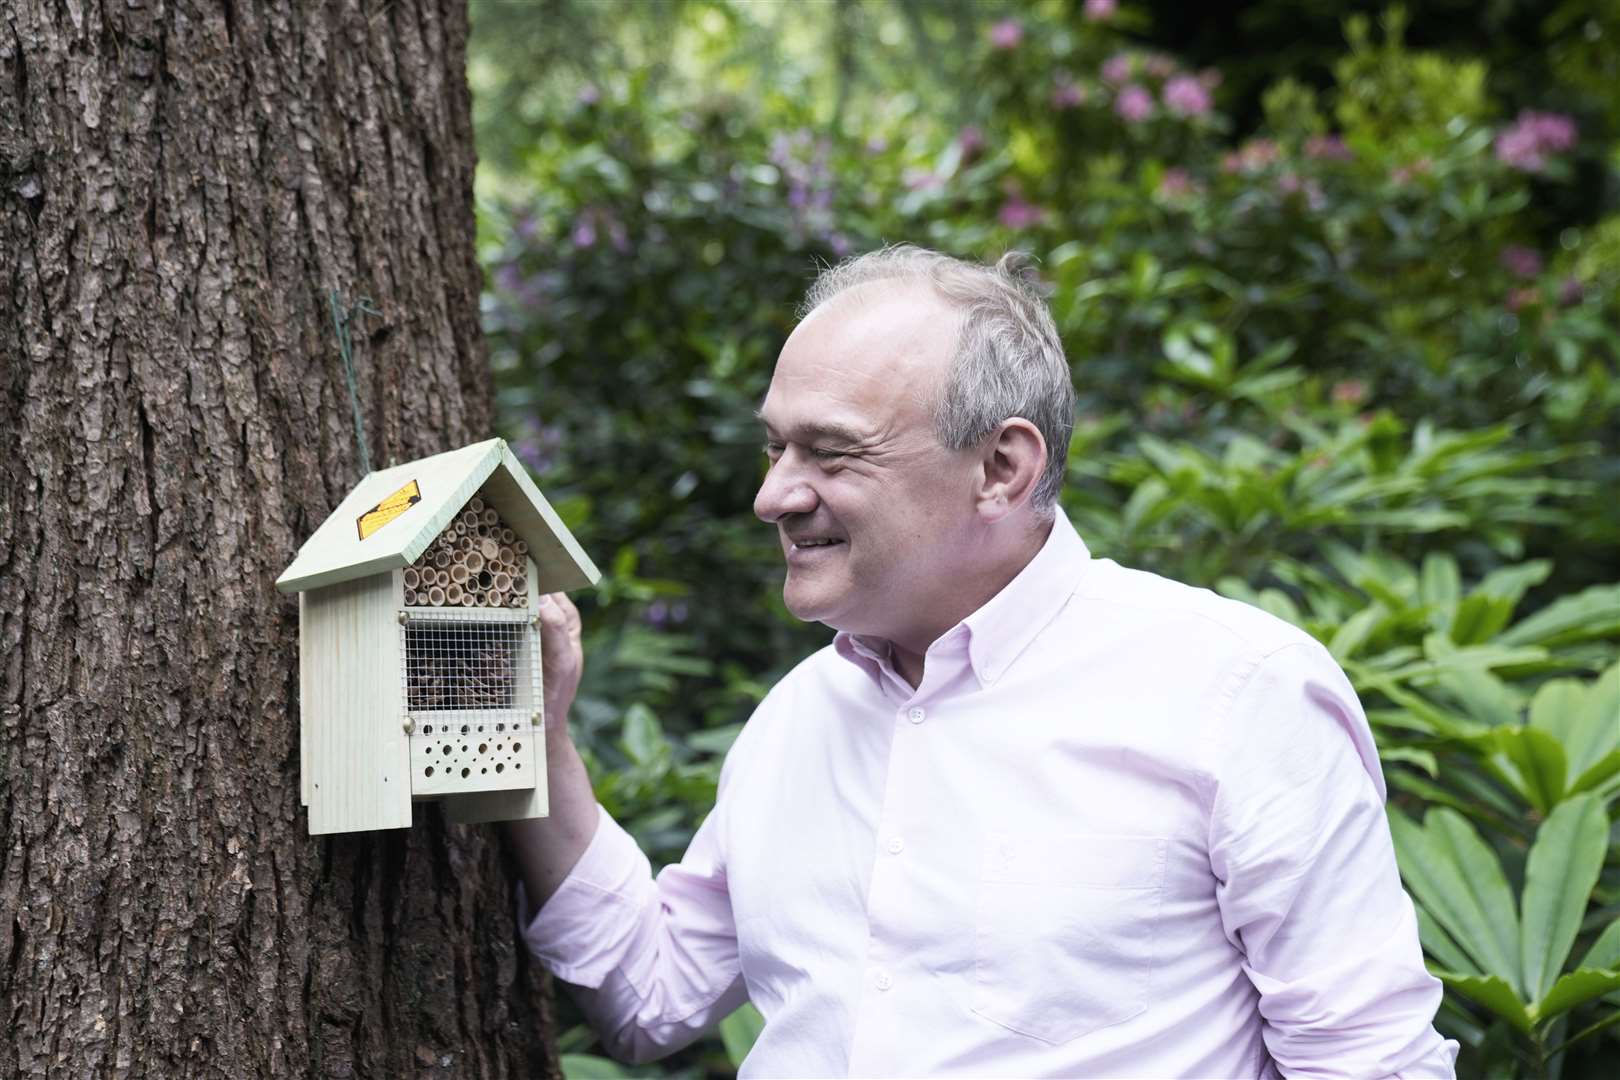 Sir Ed inspected an insect hotel during his trip to Whinfell Quarry Gardens in Sheffield (Danny Lawson/PA)